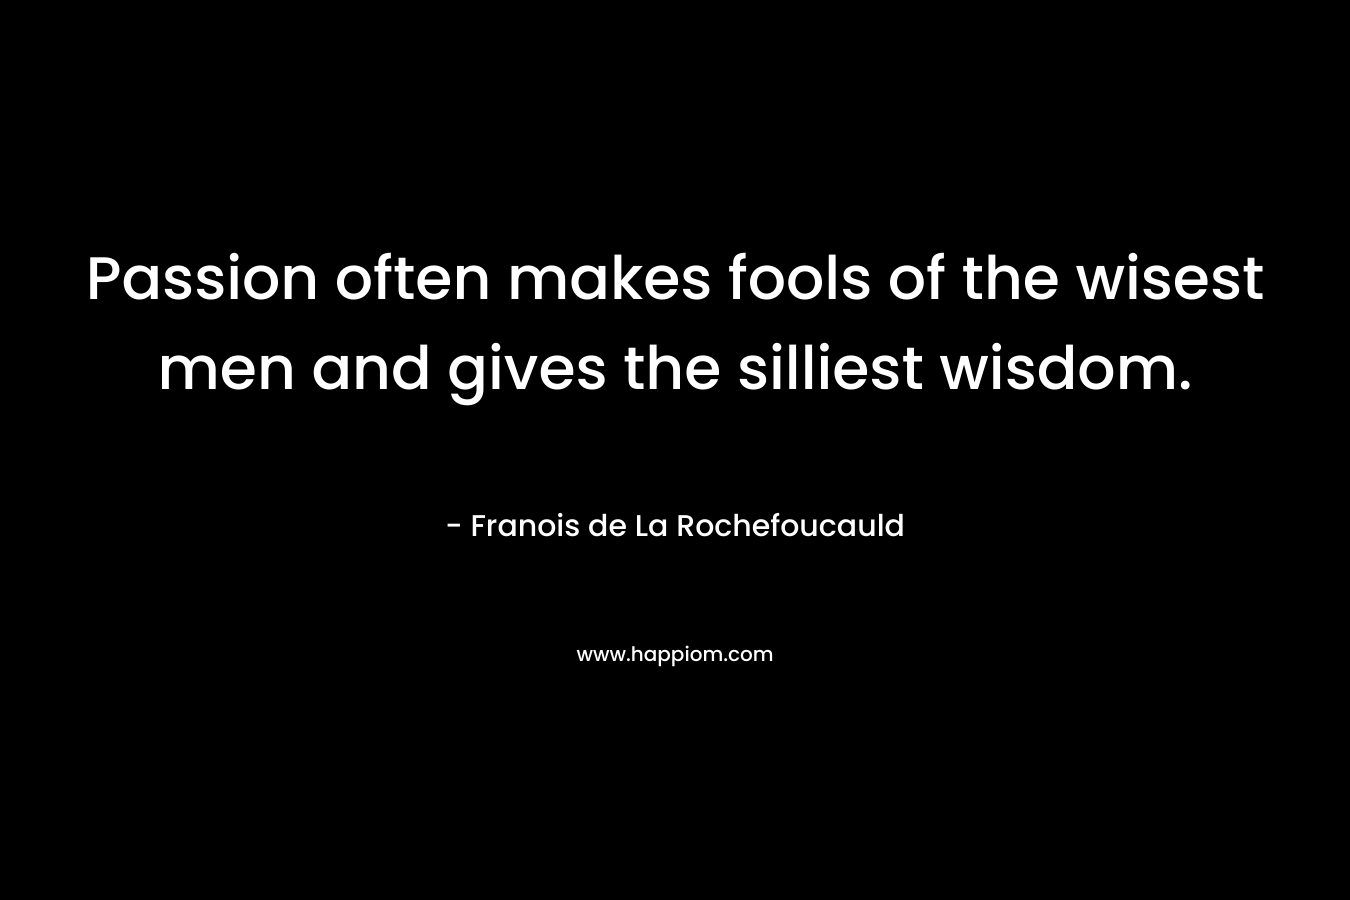 Passion often makes fools of the wisest men and gives the silliest wisdom. – Franois de La Rochefoucauld